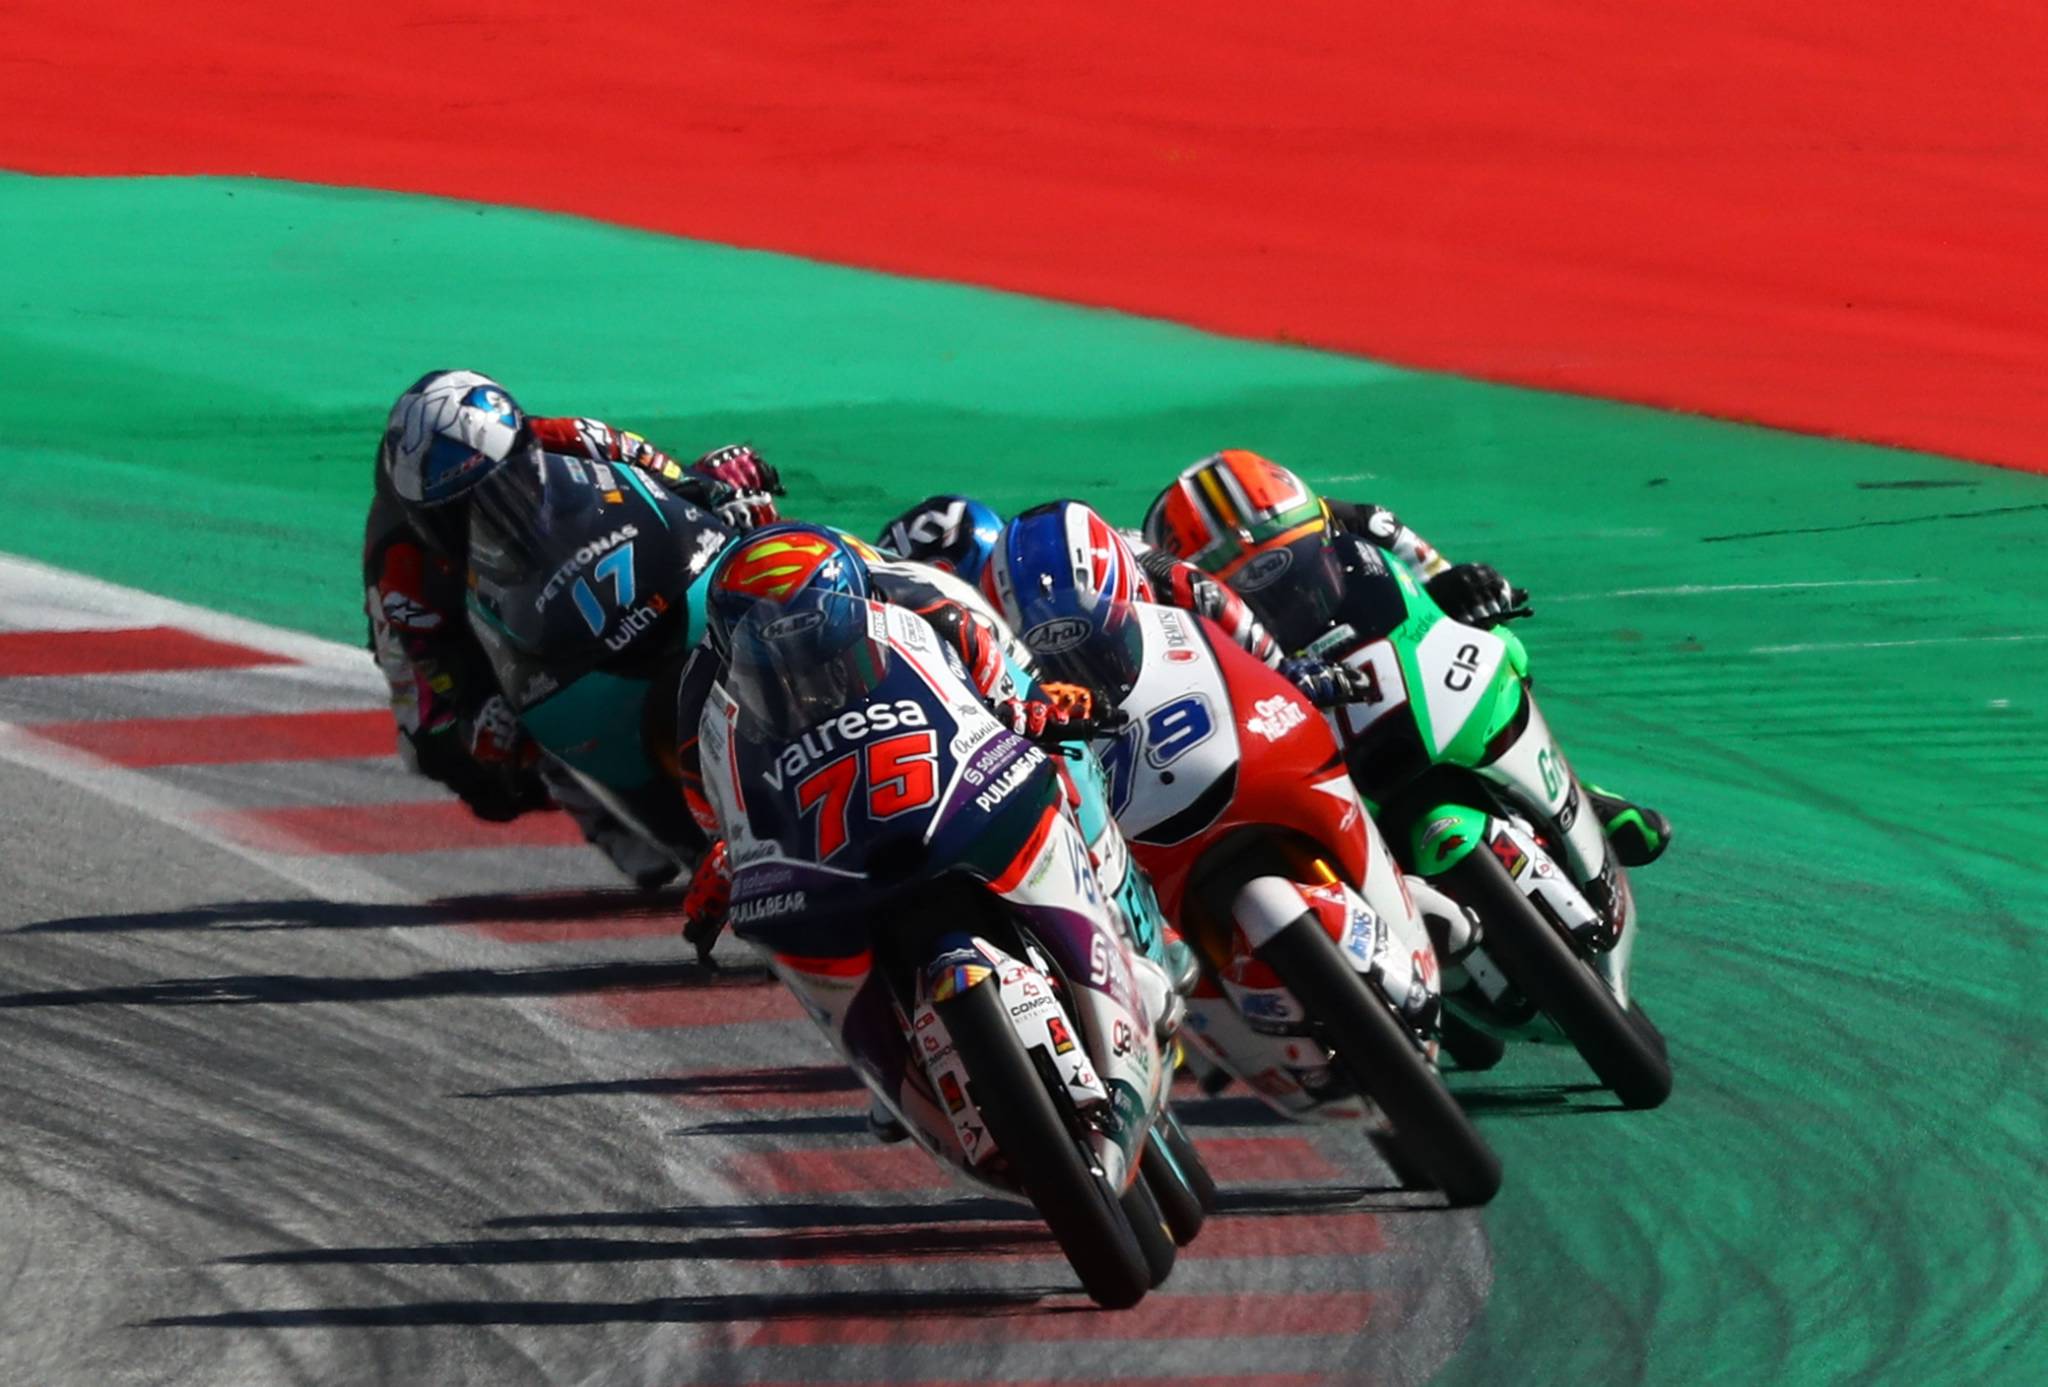 Albert Arenas leads coming out of last orner, Ai Ogura and Darryn Binder on green area and get penalised. Moto3, Austrian MotoGP . 16 August 2020